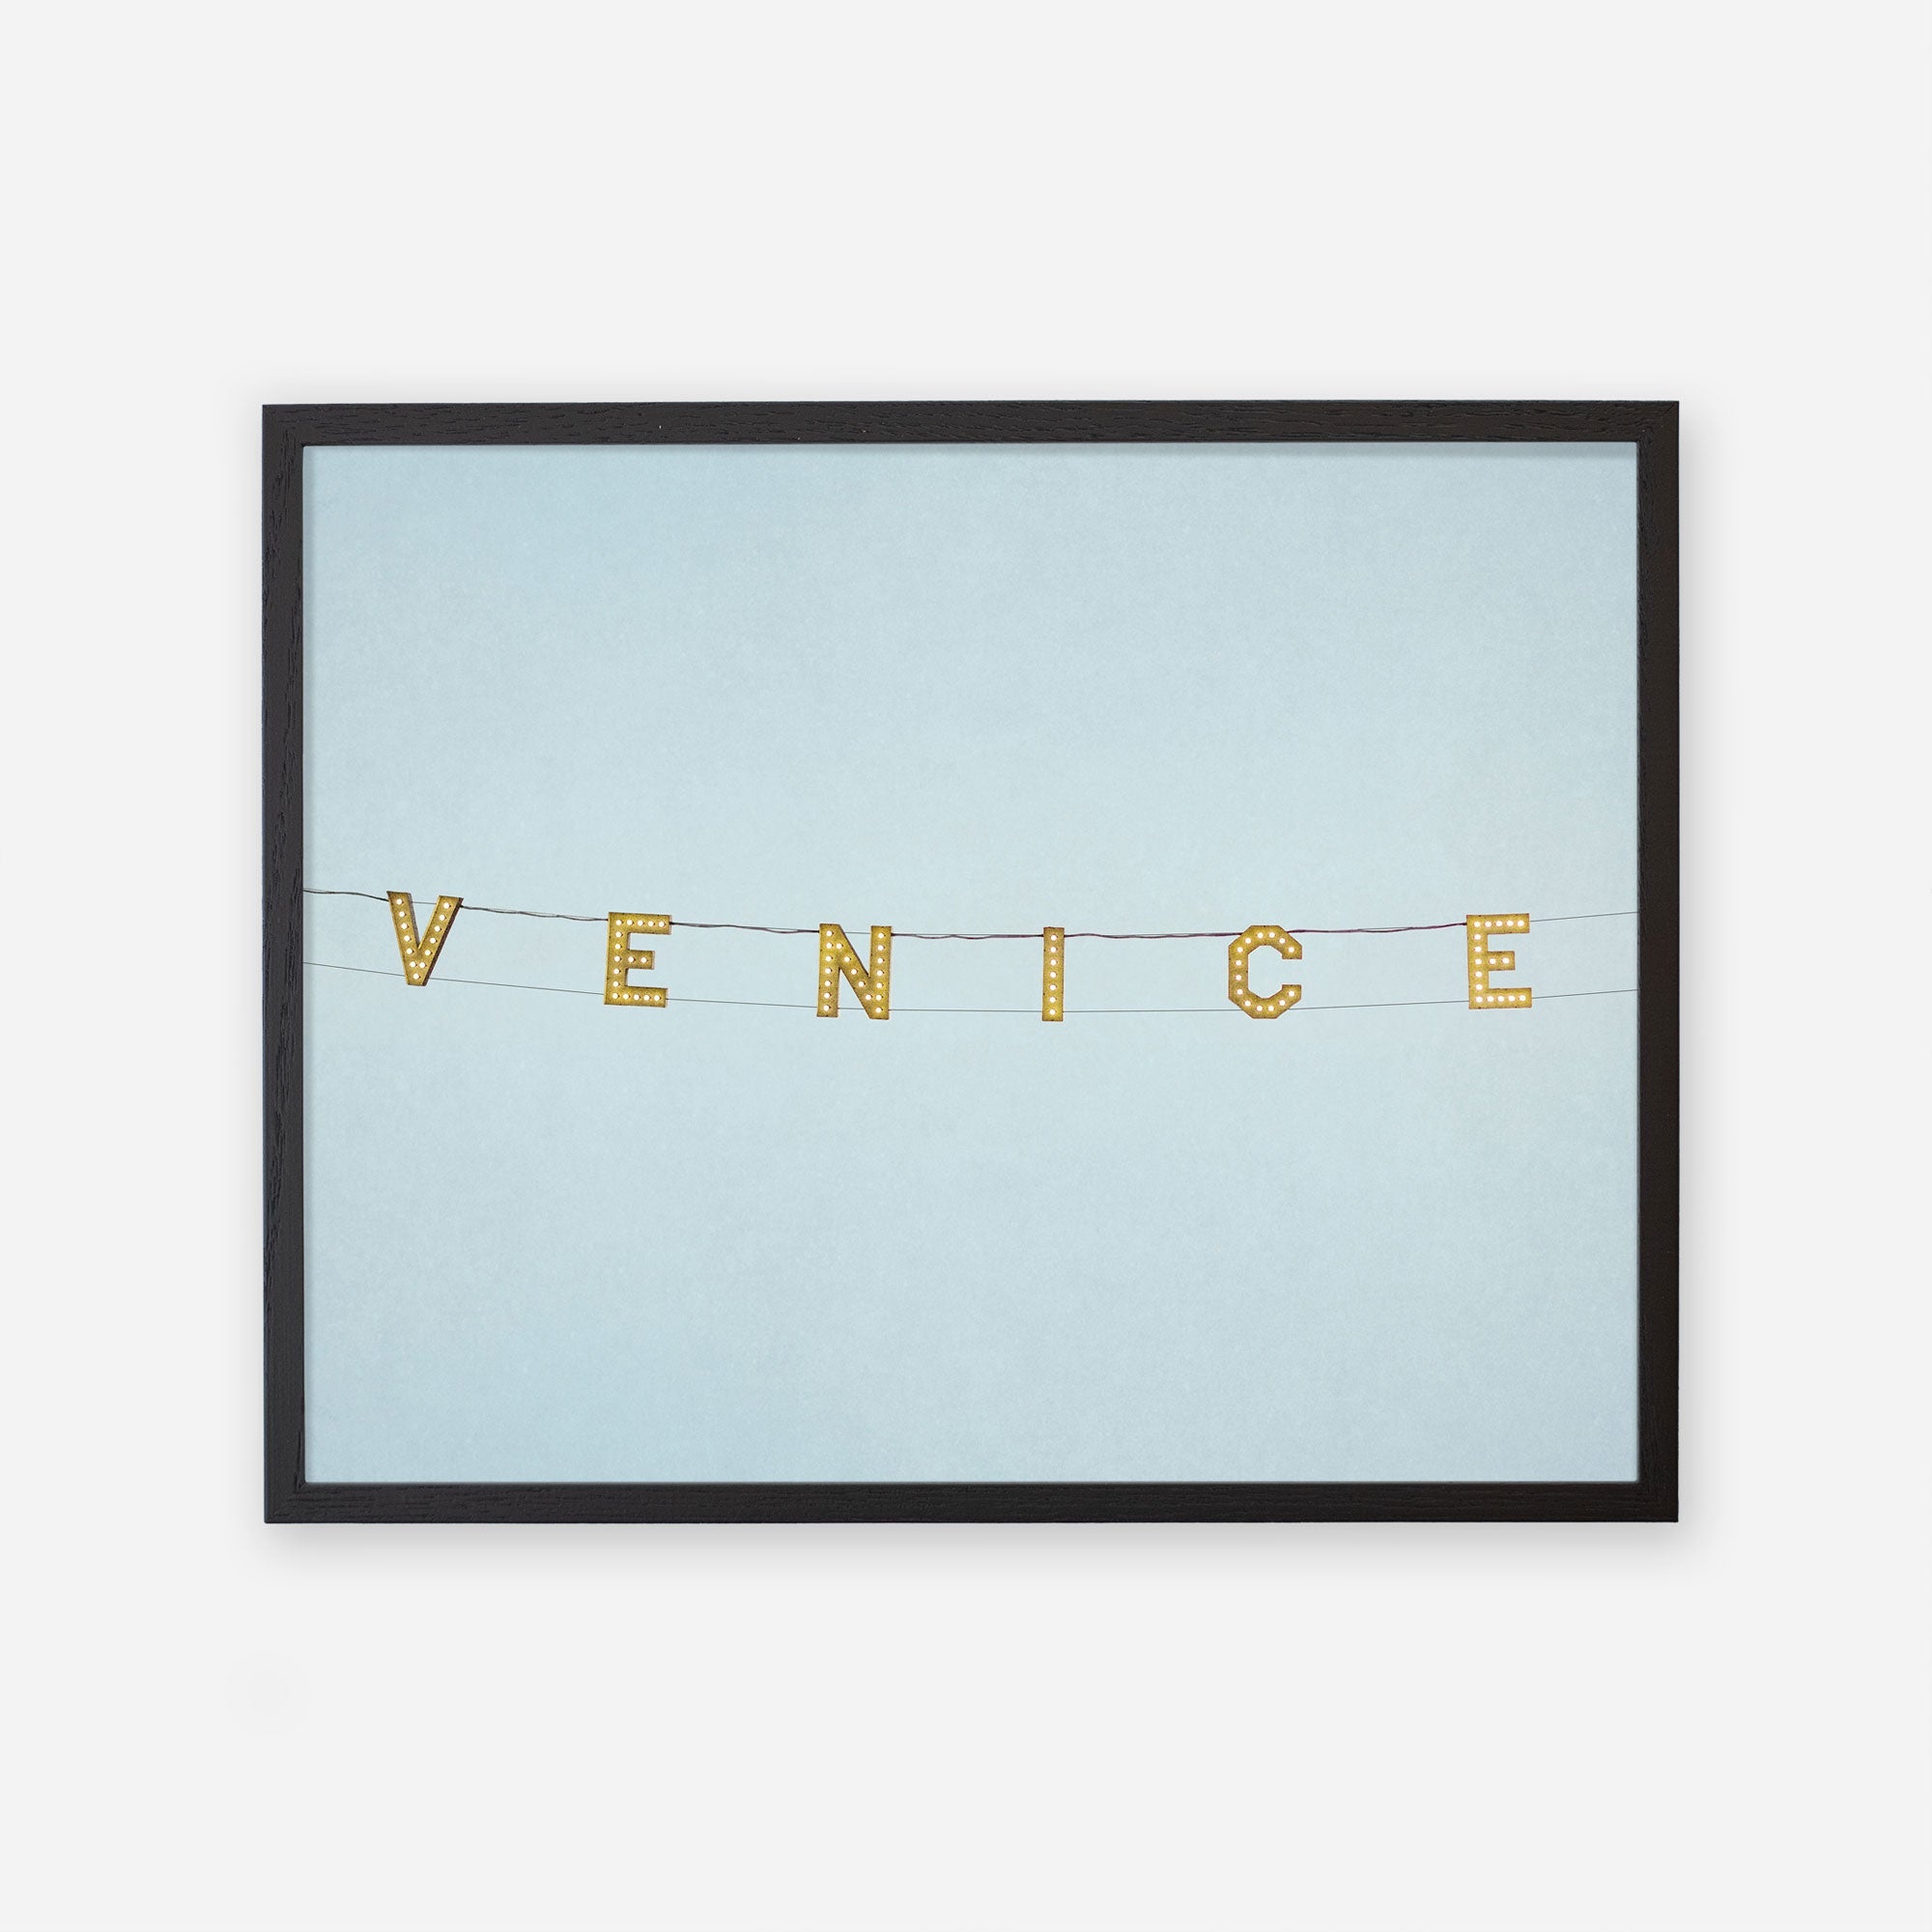 A framed picture of the &#39;Blue Venice&#39; Venice Beach Sign Print spelled out on a string of letter tiles against a plain light blue background, printed on archival photographic paper by Offley Green.